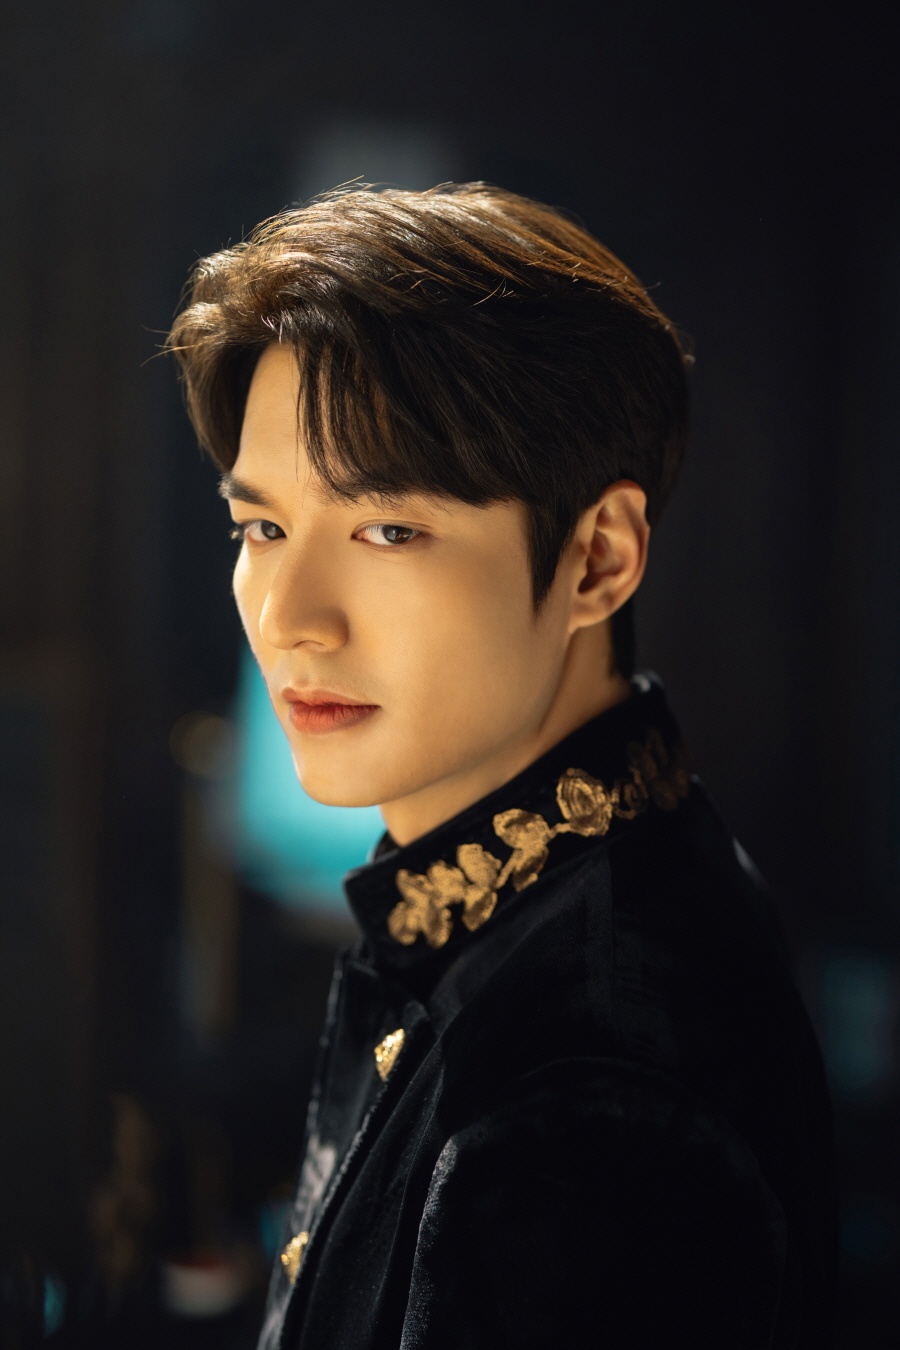 Actor Lee Min-hos return to the home room SBS The King: Monarch of Eternity finally takes off the veil today (17th).SBSs new gilt drama The King: Monarch of Eternity, which will be broadcast today (17th), is a bi-form Korean Empire emperor Lee Gon (Lee Min-ho), who is trying to close the door (of the dimension), and a door to protect someones life, people, and love (written) type South Korea Detective Jeong Tae-e Un) is a fantasy romance that draws through cooperation between the two Worlds.# Lee Min-hos comeback for three years, thickened mature beautyThe King: Monarch of Eternity was the first work Lee Min-ho chose after his discharge, with much attention focused early on.Lee Min-ho is playing the role of Korean Empire Emperor and Igon in 2020 in The King, and has already been hotter than ever before, foreshadowing the mature acting transformation.Lee is the third emperor of Korean Empire, and is a perfect Monarch with a beautiful appearance, a graceful figure, and a quiet character. He is also an excellent figure in coordination, horse riding, and mathematics.Lee Min-ho, who is armed with a thicker masculine beauty, is expected to have a mature acting ability along with the charm of Lee Min-ho.#Kim Eun-sook X Lee Min-ho, golden combination boasting unbreakable mythIn April, with a range of dramas pouring in, the reason why The King gets the most attention is by far the reunion of Kim Eun-sook writer and Lee Min-ho.Kim Eun-sook is a hit-making maker who hits syndrome every Drama, including Mr. Sunshine, Dawn of the Sun, and Dokkaebi.Lee Min-ho also hit the Korean Wave with a high performance in every performance such as Legend of the Blue Sea, Heirs, City Hunter, and Boys over Flowers.As the romance masters who have already shown a fantastic co-work with heirs have reunited, it is considered to be the most anticipated work of the year.# Lee Min-ho X Kim Go-eun, Dimension is another fantasy romance chemiNew chemistry from Lee Min-ho and Kim Go-eun is also a promising point.Lee Min-ho has been a strong hit with the South Korea representative actresses and perfect co-work, giving viewers a heart-warming romance and boasting a strong popularity as a rocking.In The King, Kim Go-eun and his former couple Kim Kim Kim Go-eun were also excited by the fairy tale visuals.Lee Min-ho and Kim Go-eun, who transformed into the Korean Empire Emperor Egon and the South Korea Homicide Detective, respectively, raise expectations for the Planet World Fantasy Romance.Lee Min-ho, who has led the box office craze for each of his films, is drawing keen attention as to whether he will create another Legend through The King: Monarch of Eternity.iMBC  Photos